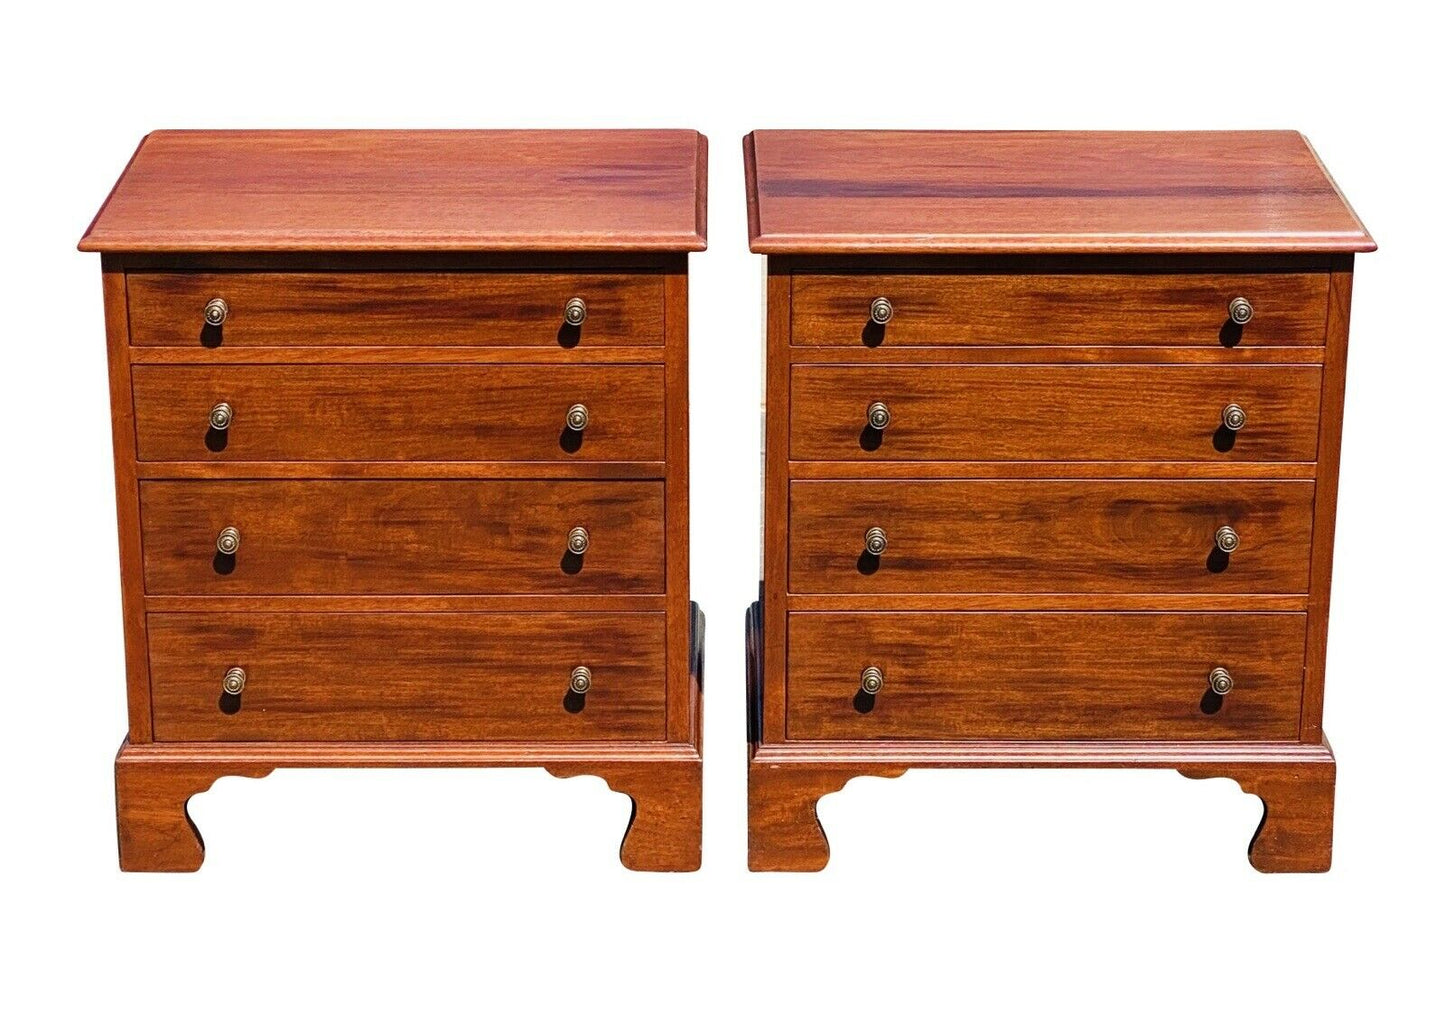 19th Century Antique Pair of Mahogany Bachelors Chests / Nightstands